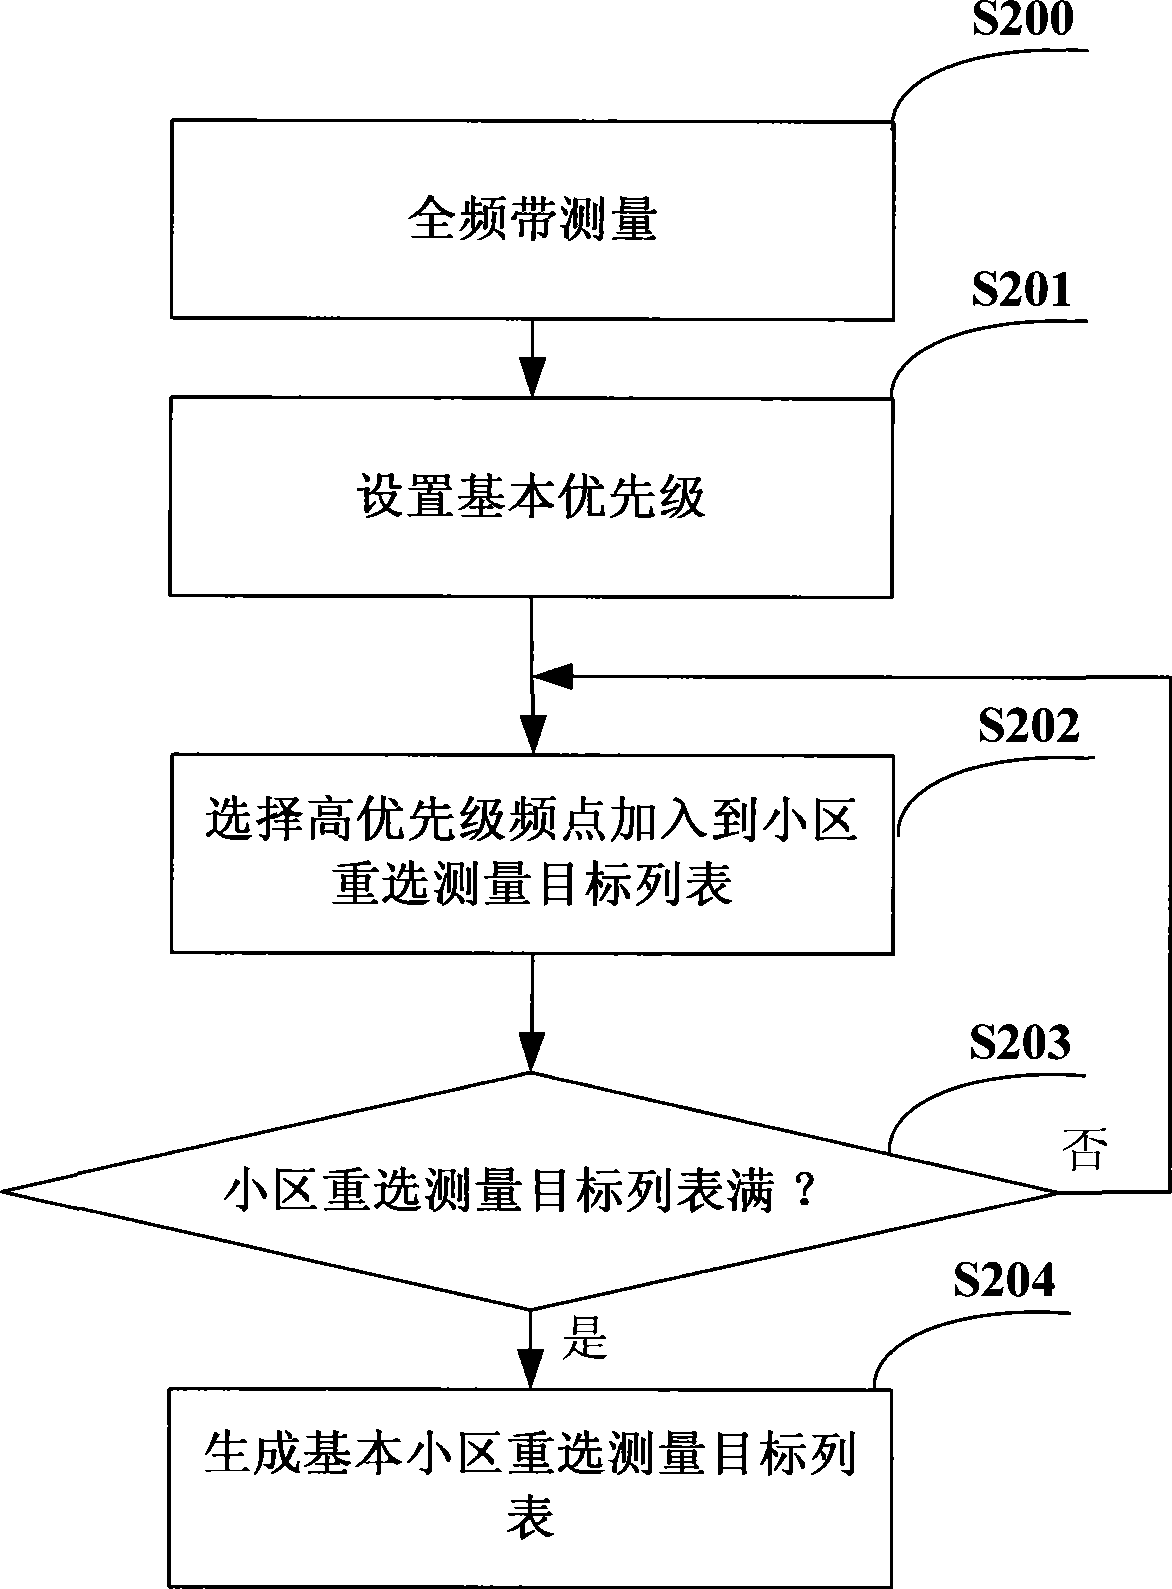 Method for realizing cell re-selection by mobile device in mobile communication system